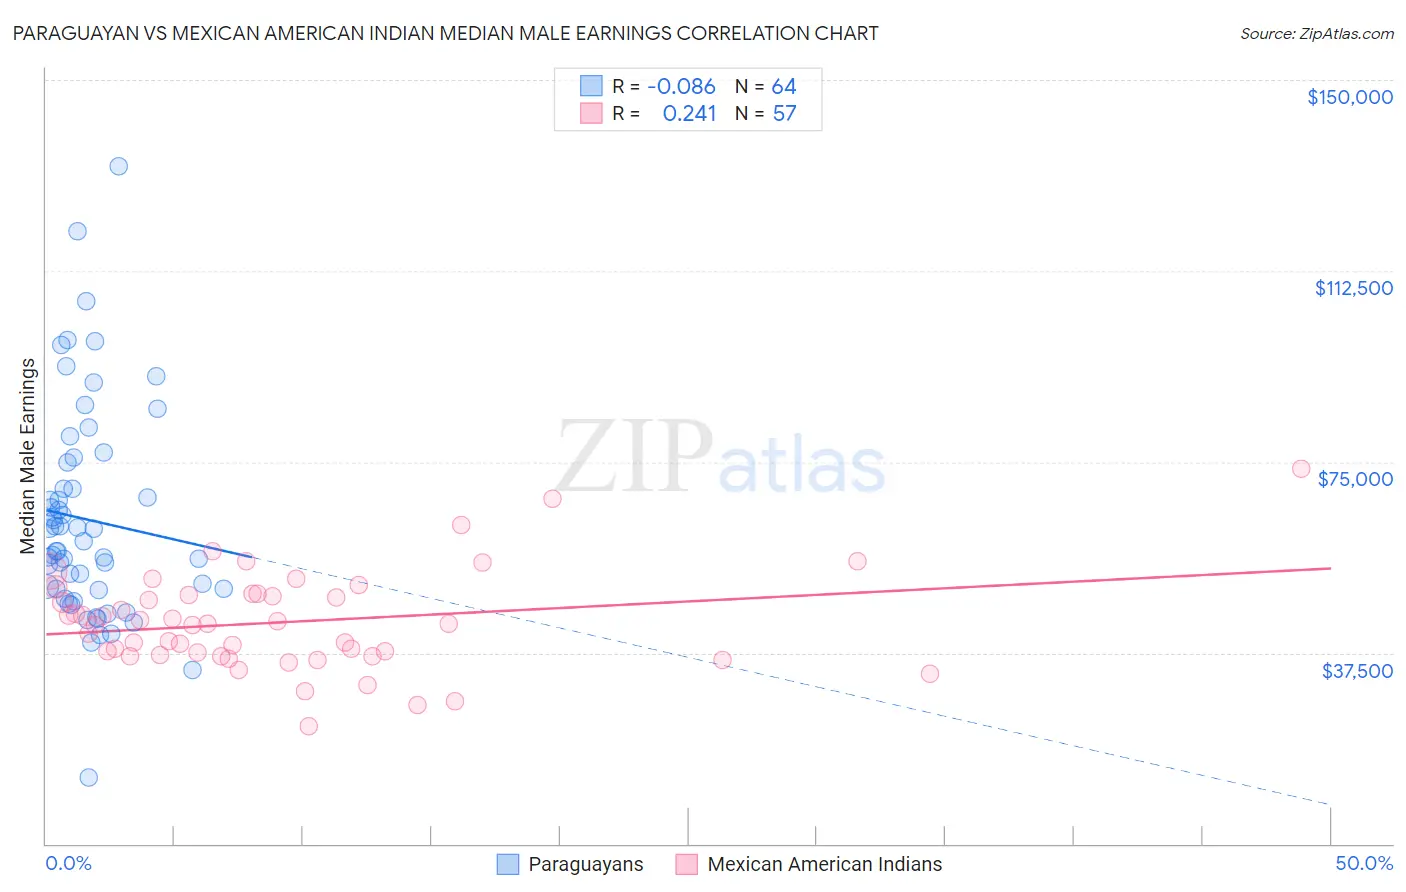 Paraguayan vs Mexican American Indian Median Male Earnings